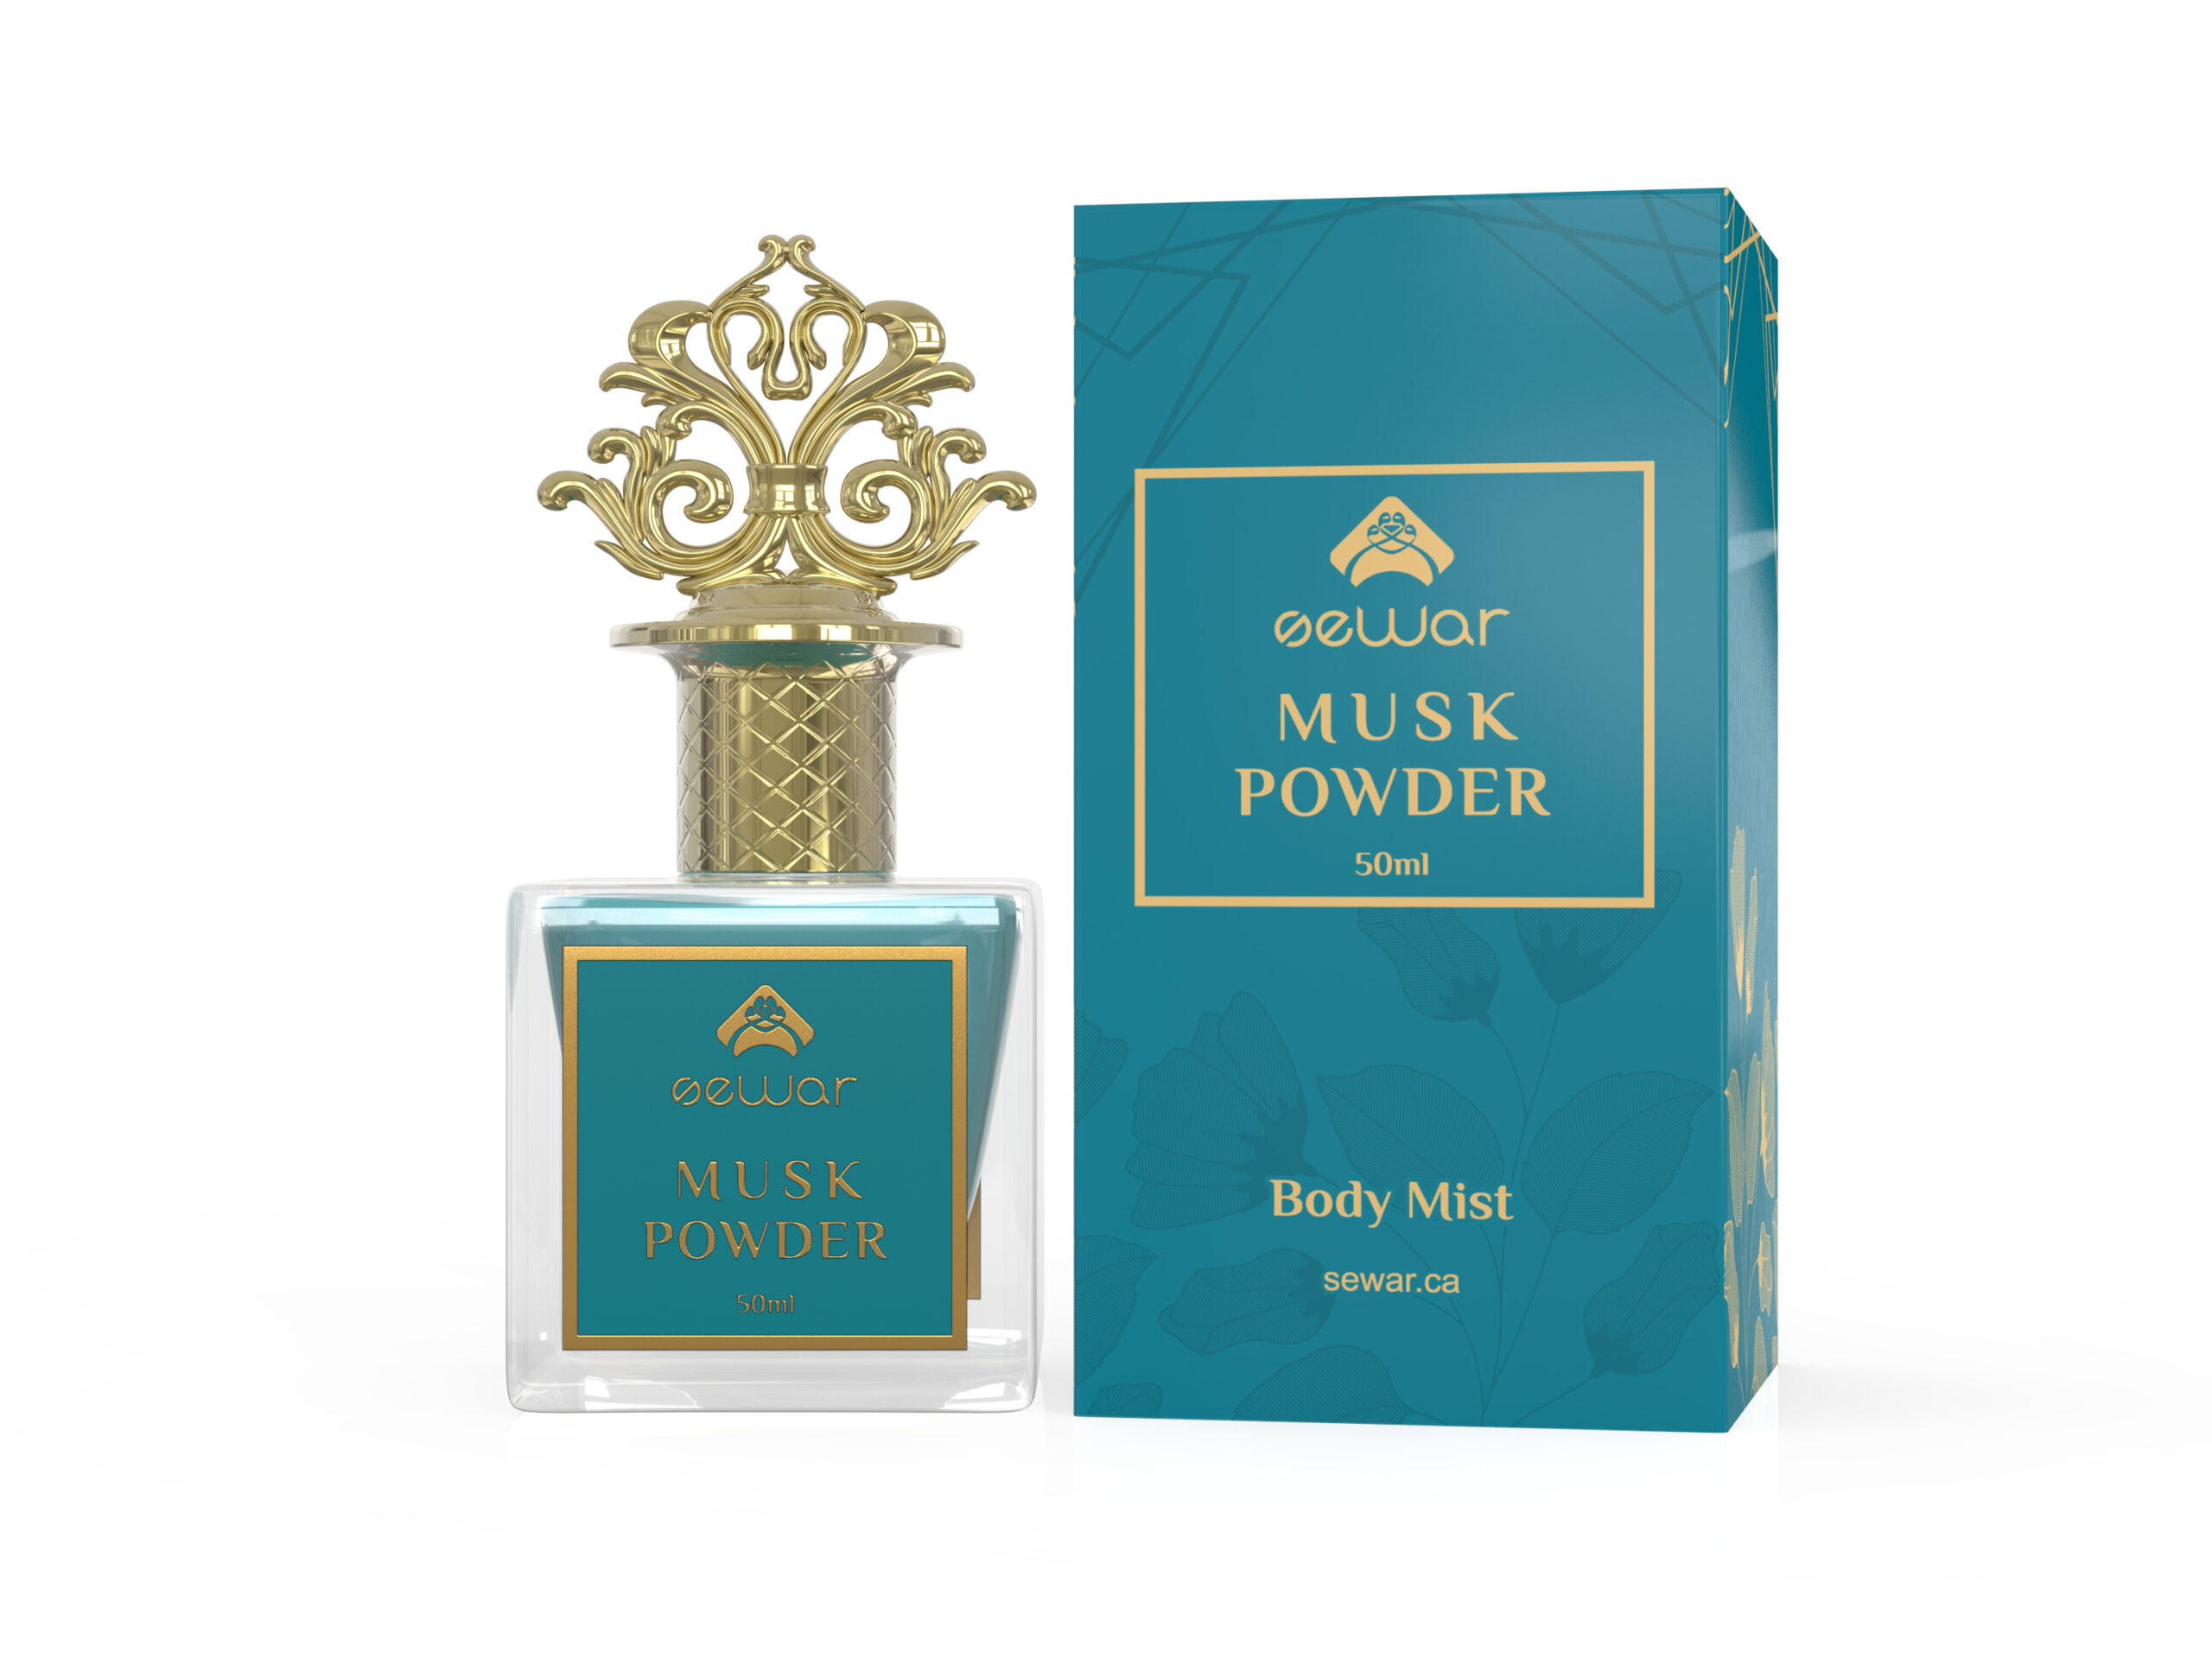 Powder Musk Body Mist by Sewar with Light and Airy Powder Notes